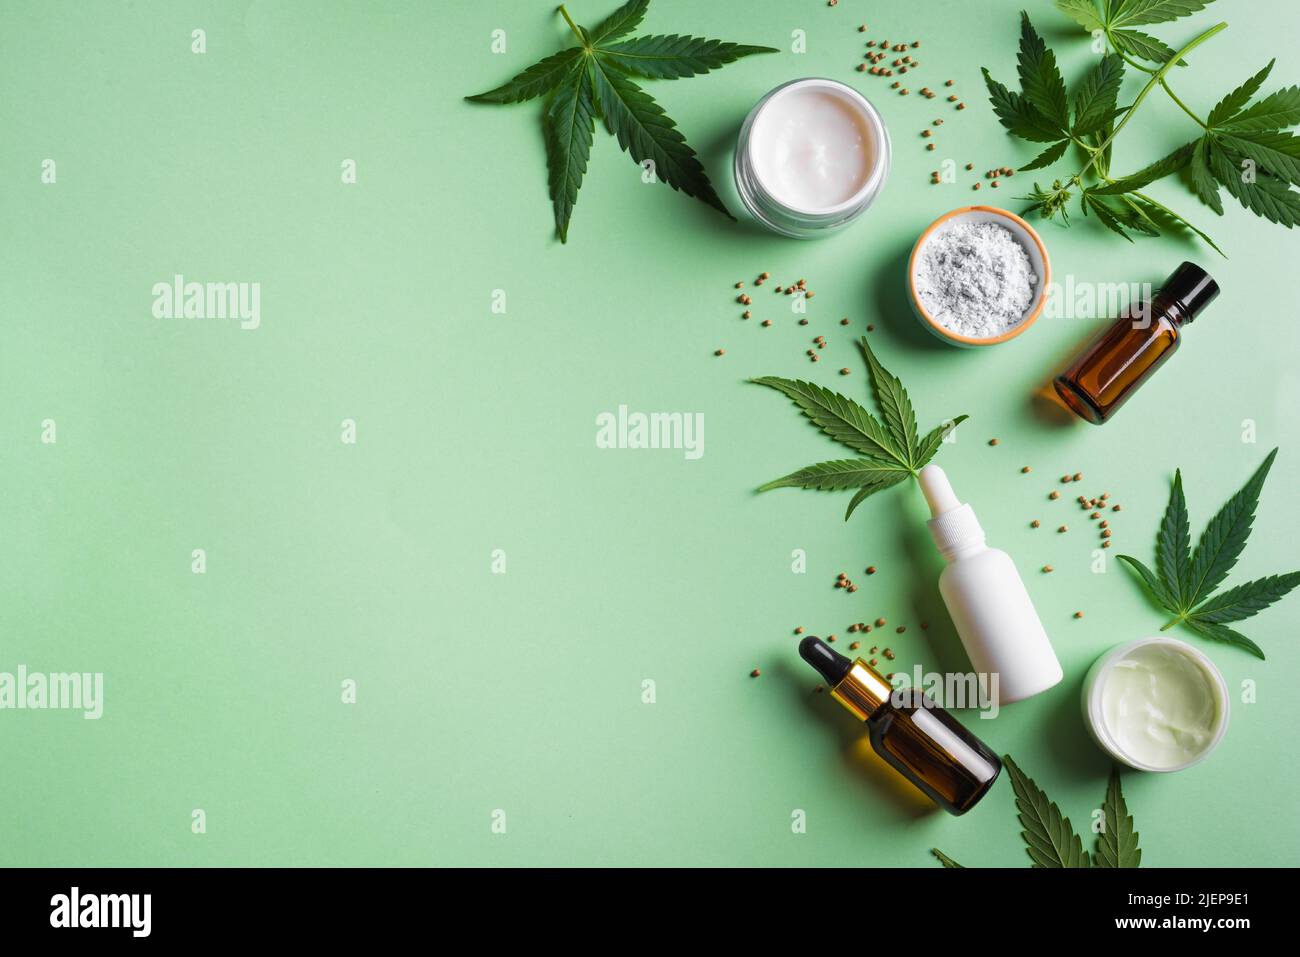 Hemp cannabis  leaves and beauty products, cbd oil in bottle, face creme and serum, alternative medicine and organic skin care concept. Copy space. Stock Photo